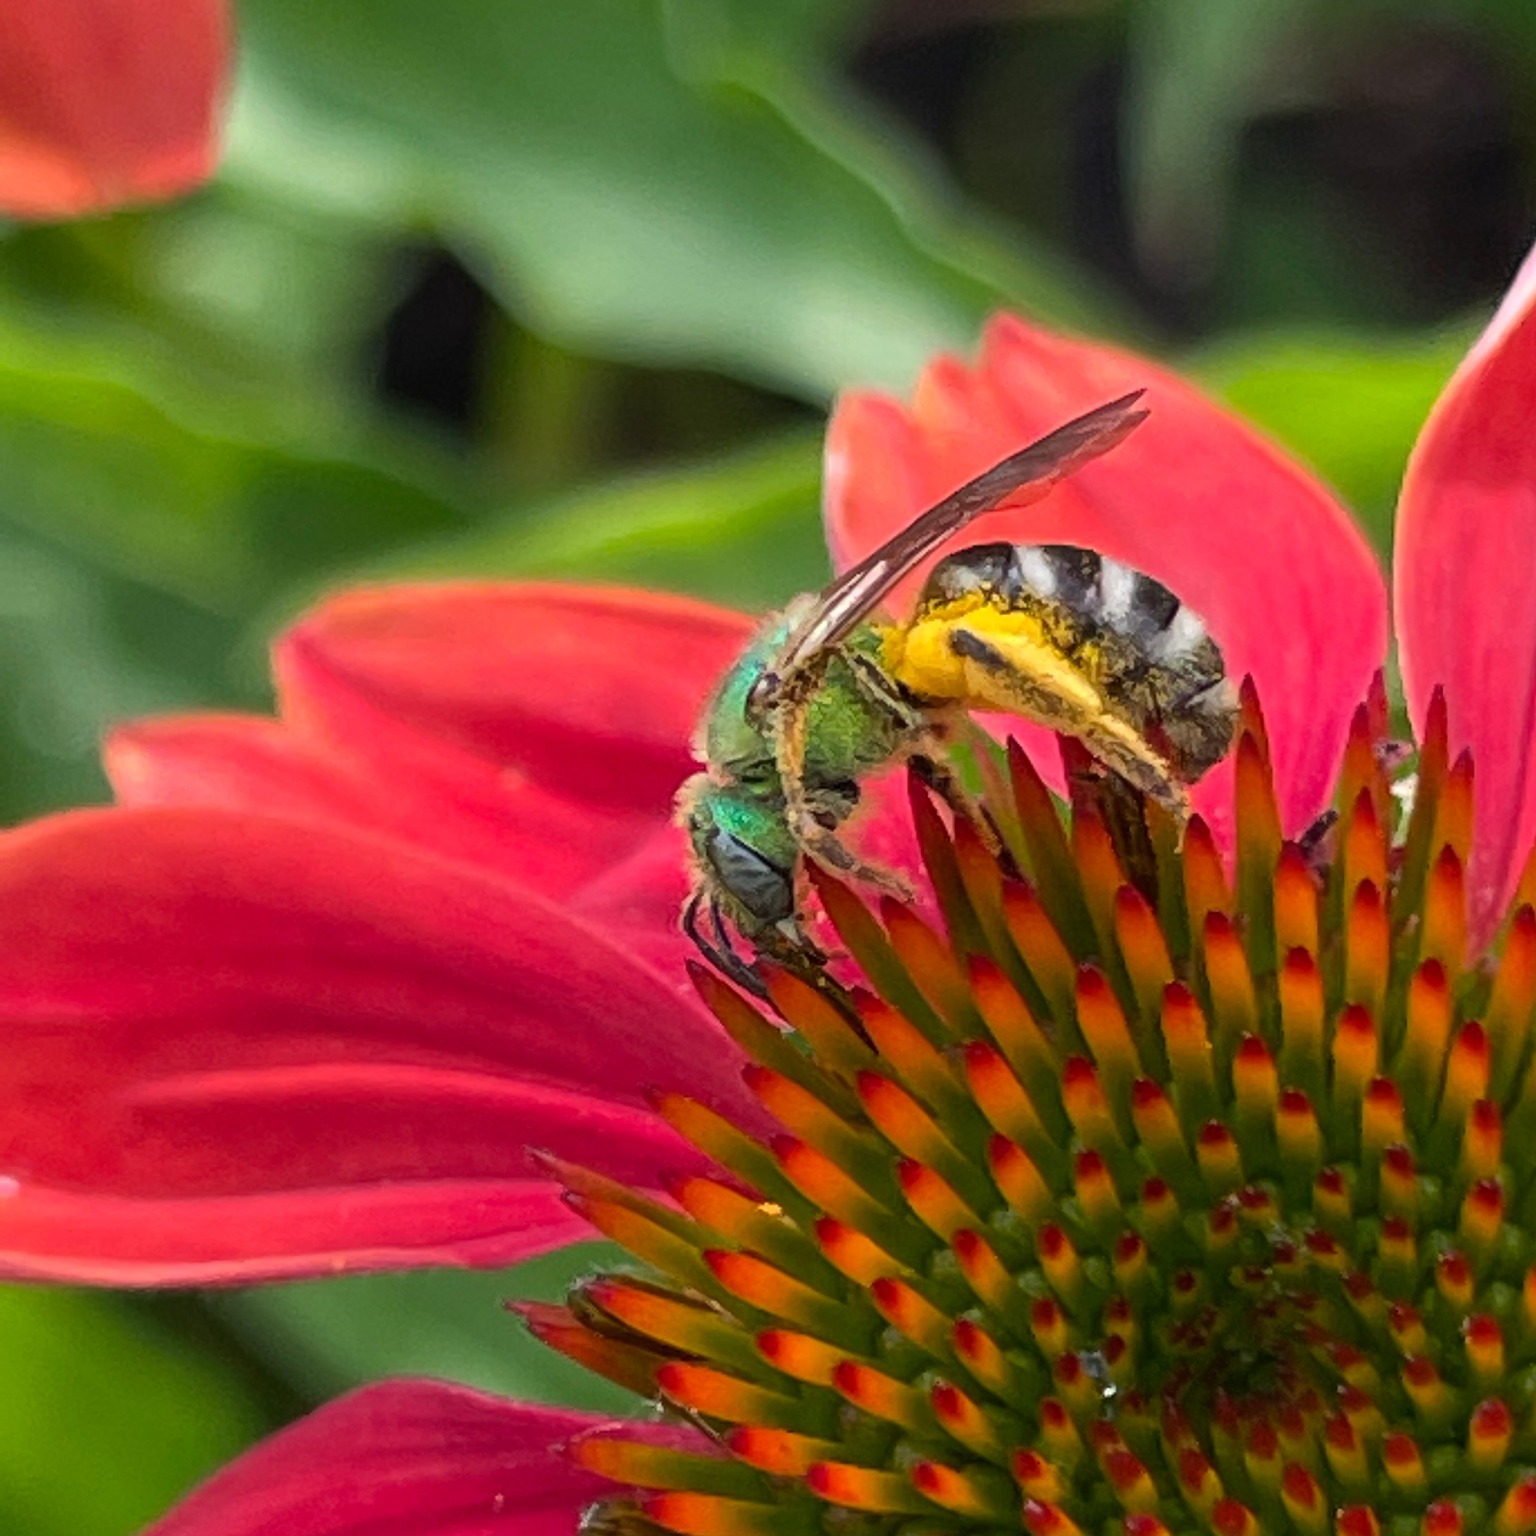 A female bicolored striped sweat bee on a red echinacea flower